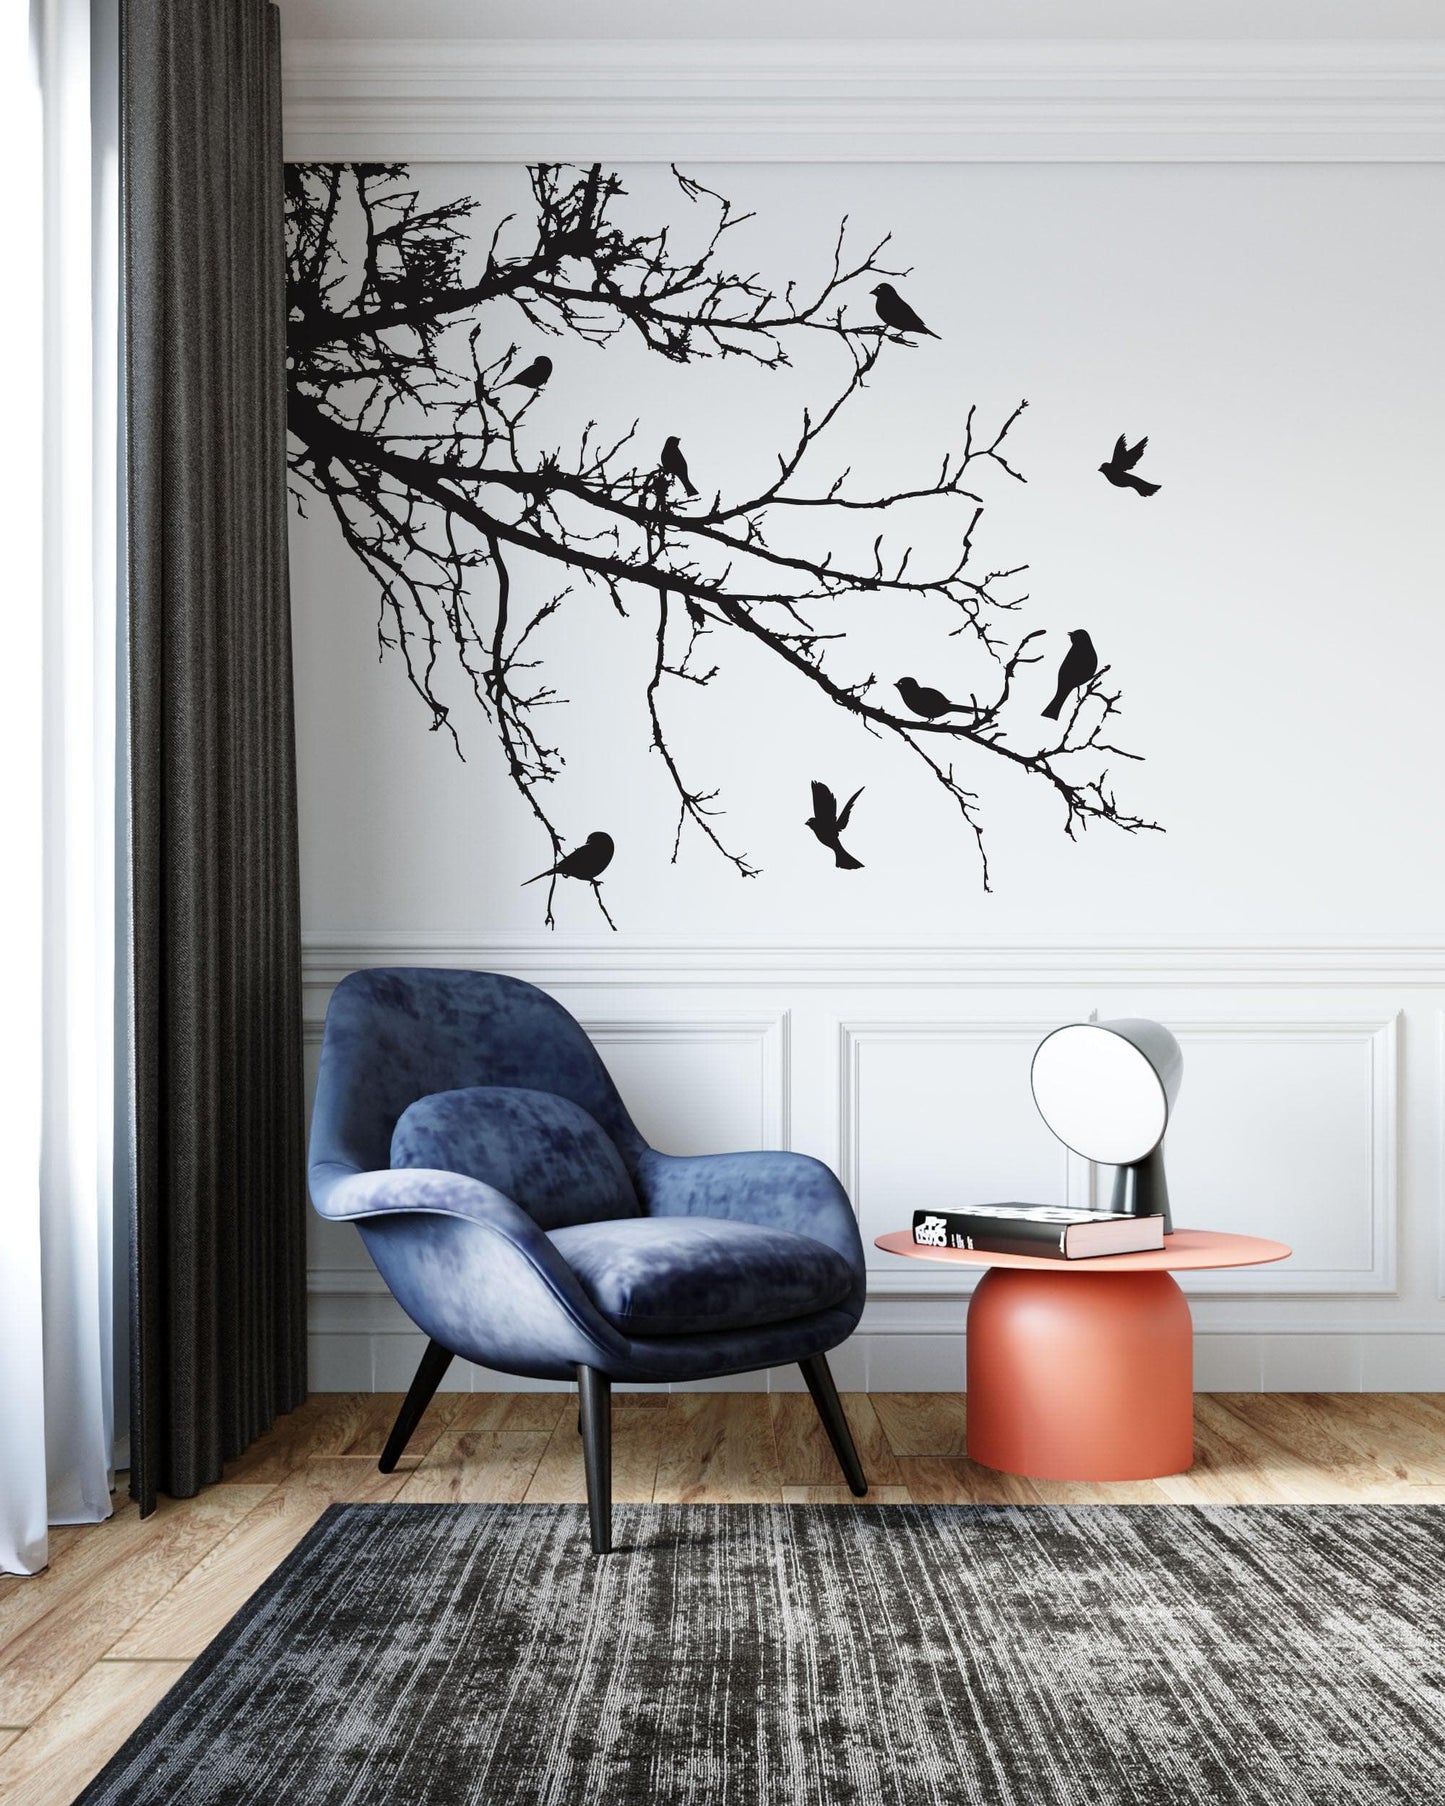 Black decal of 8 birds on tree branches on a white wall above a blue couch.